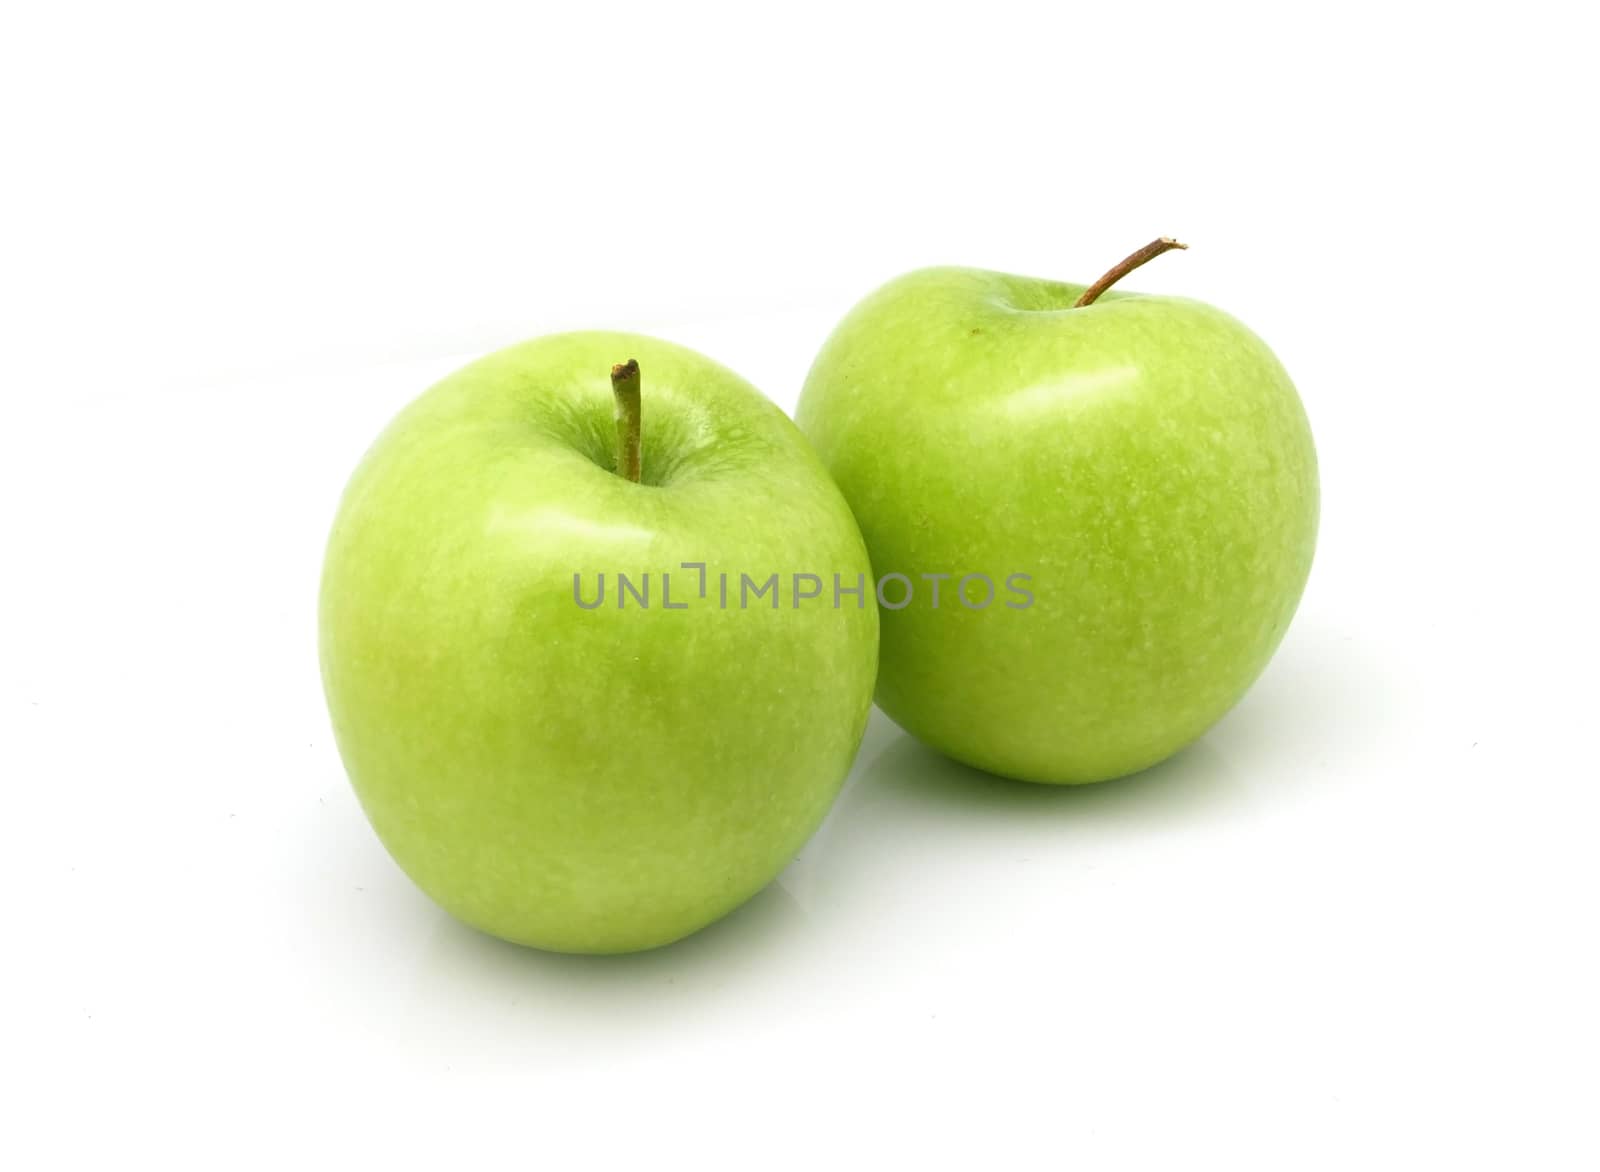 Two green apples on white background by cougarsan